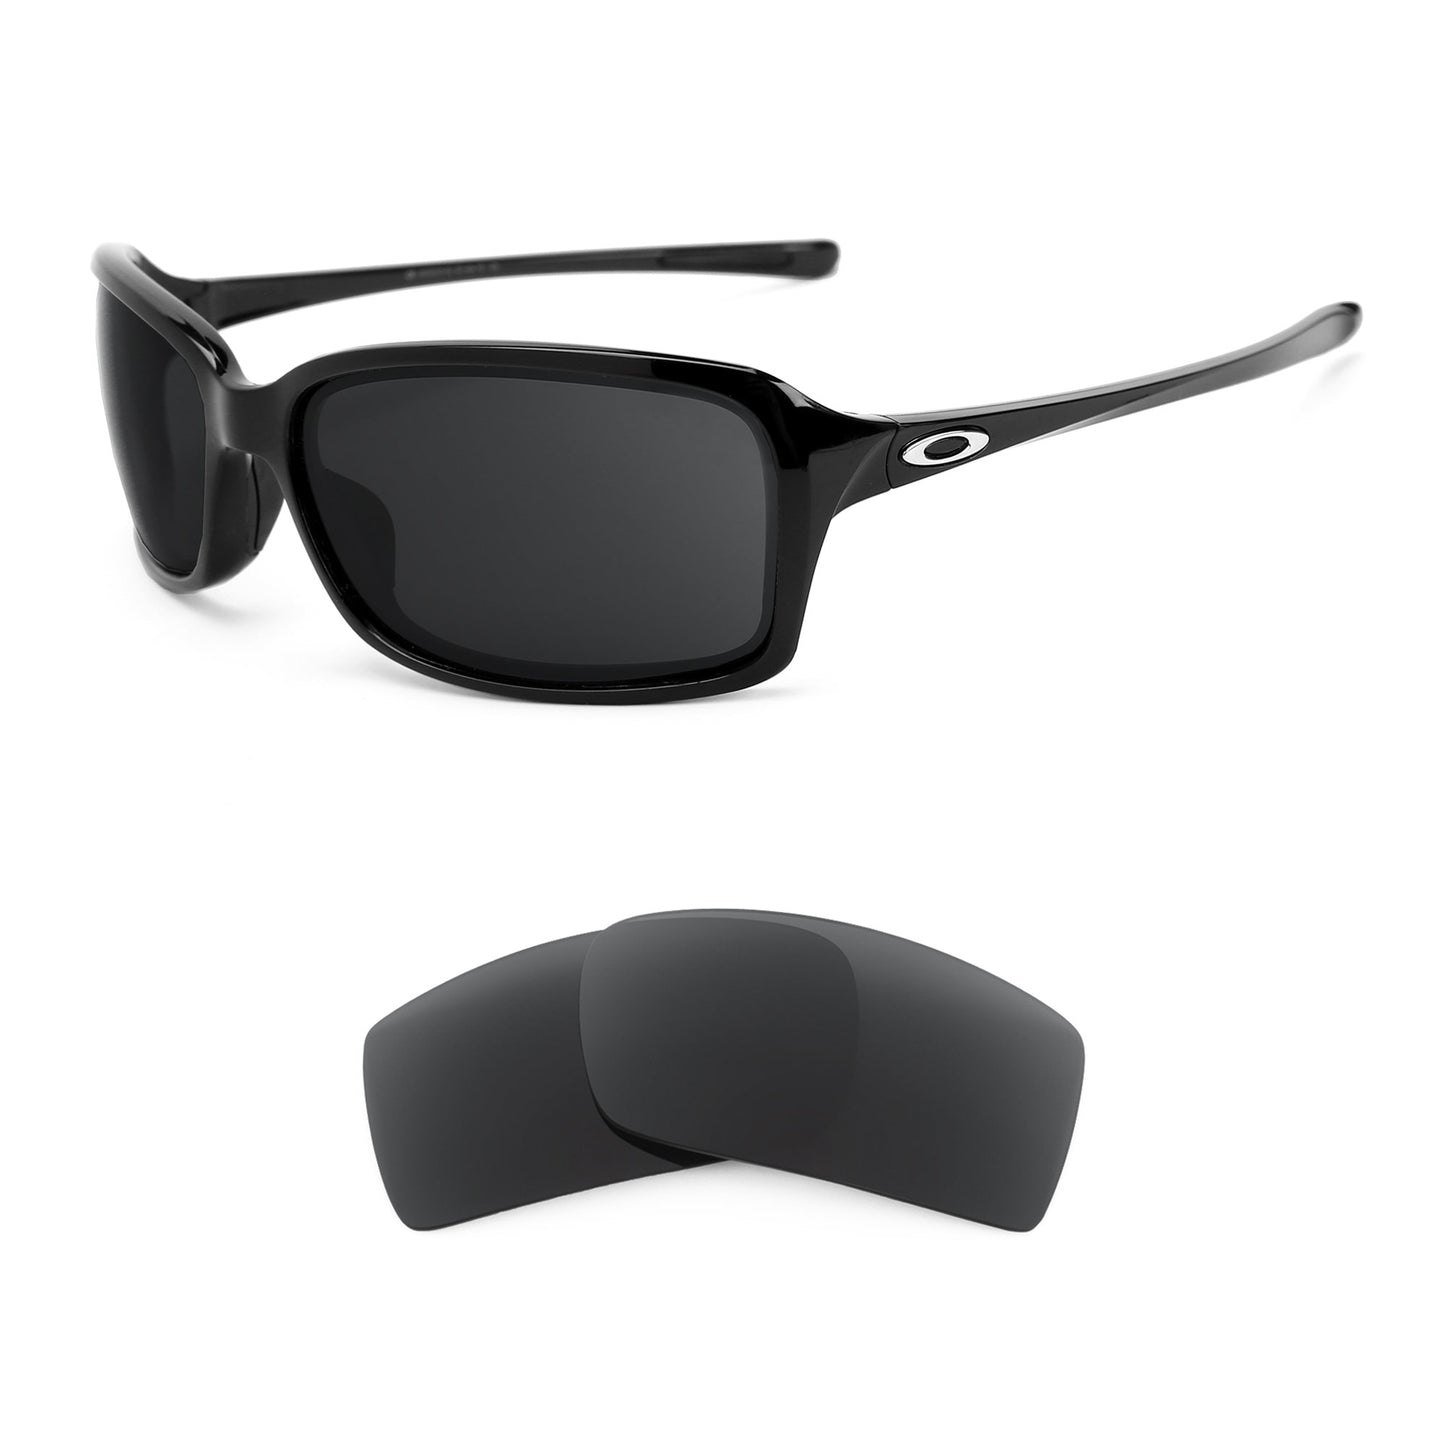 Oakley Dispute sunglasses with replacement lenses